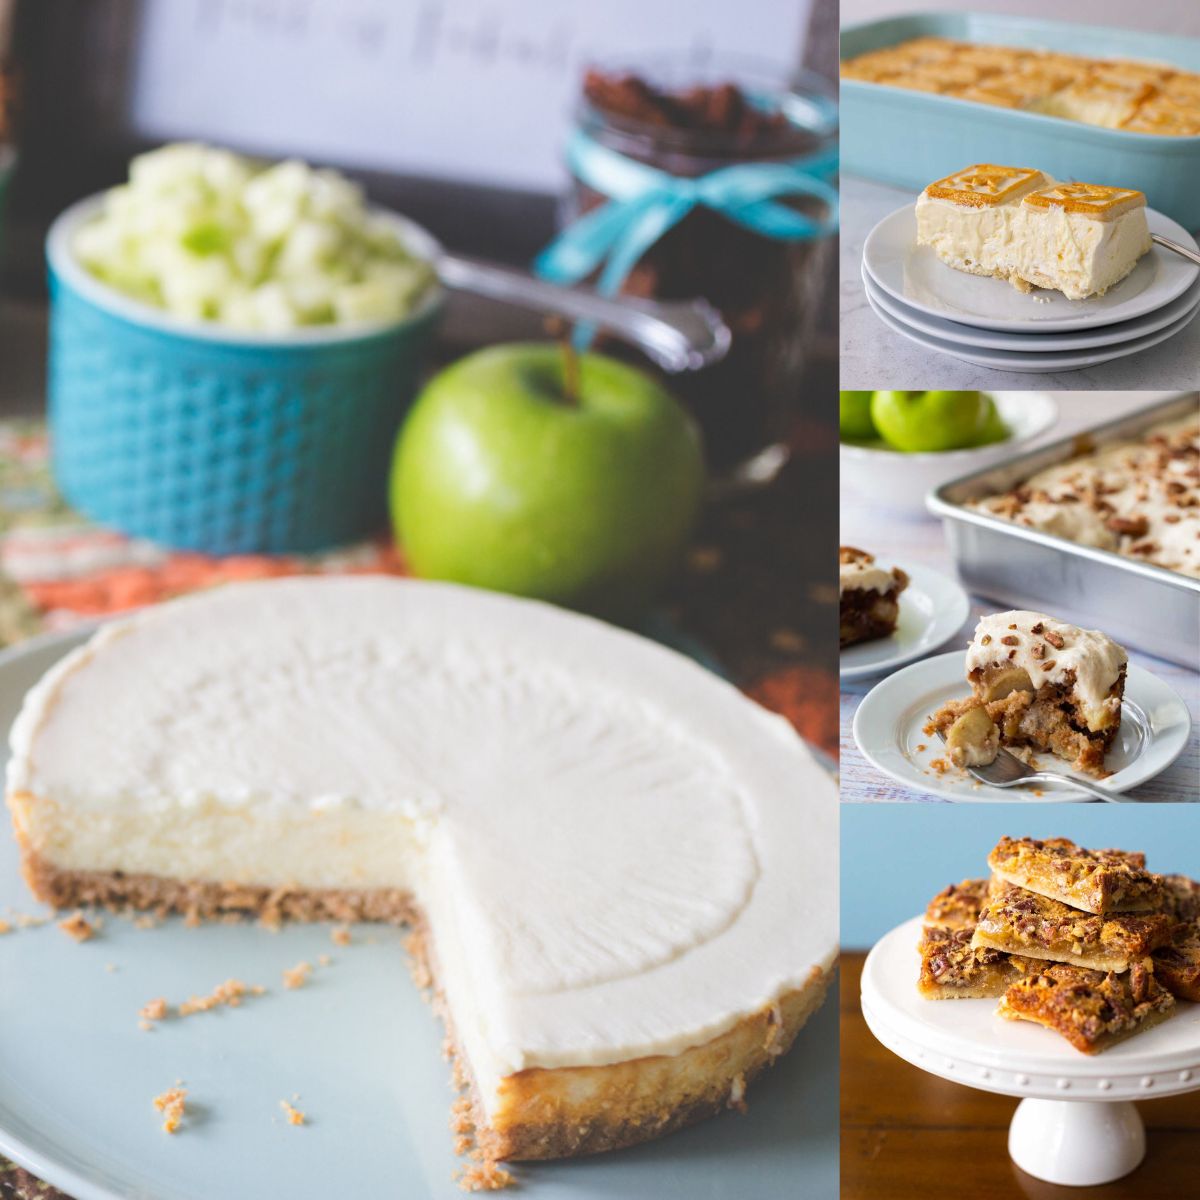 The photo collage shows 4 different easy Thanksgiving desserts including cheesecake, apple cake, pecan pie bars, and banana pudding.